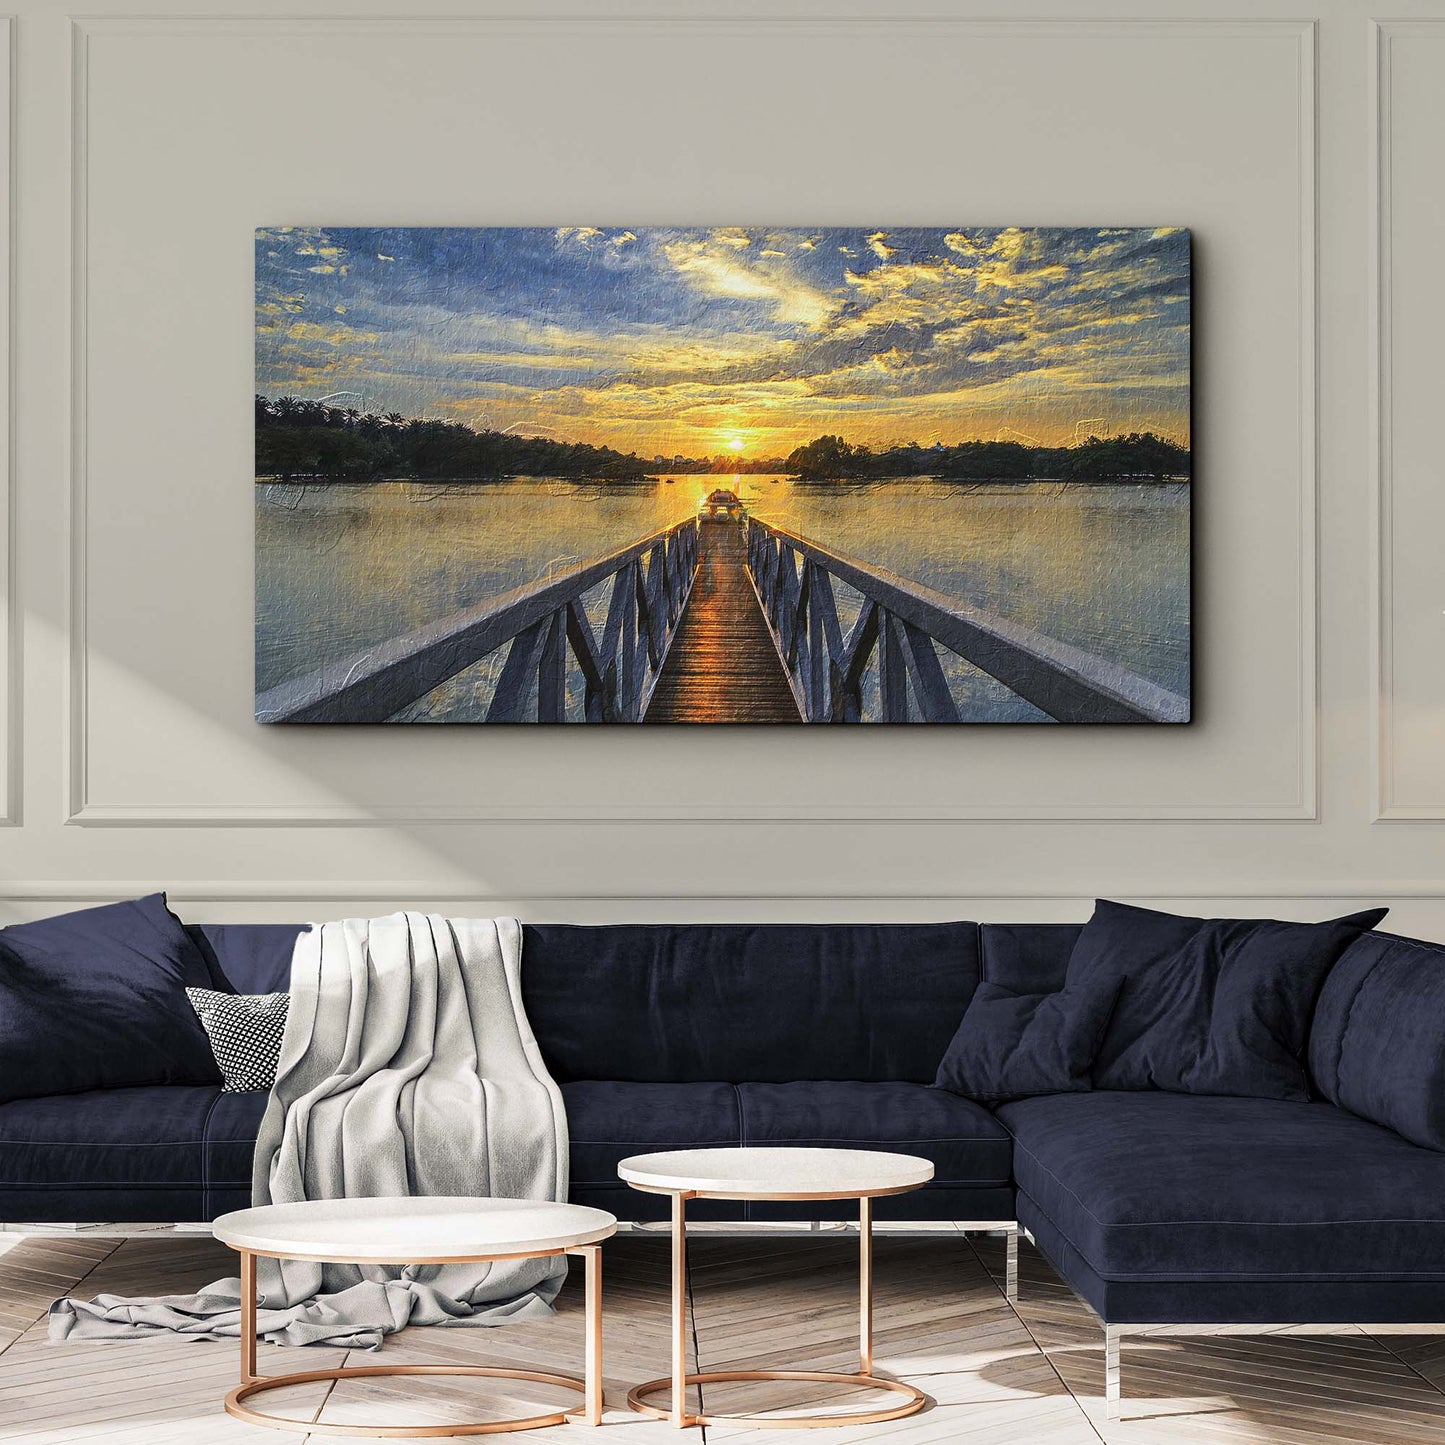 Vibrant Sunset Lake Canvas Wall Art Style 2 - Image by Tailored Canvases